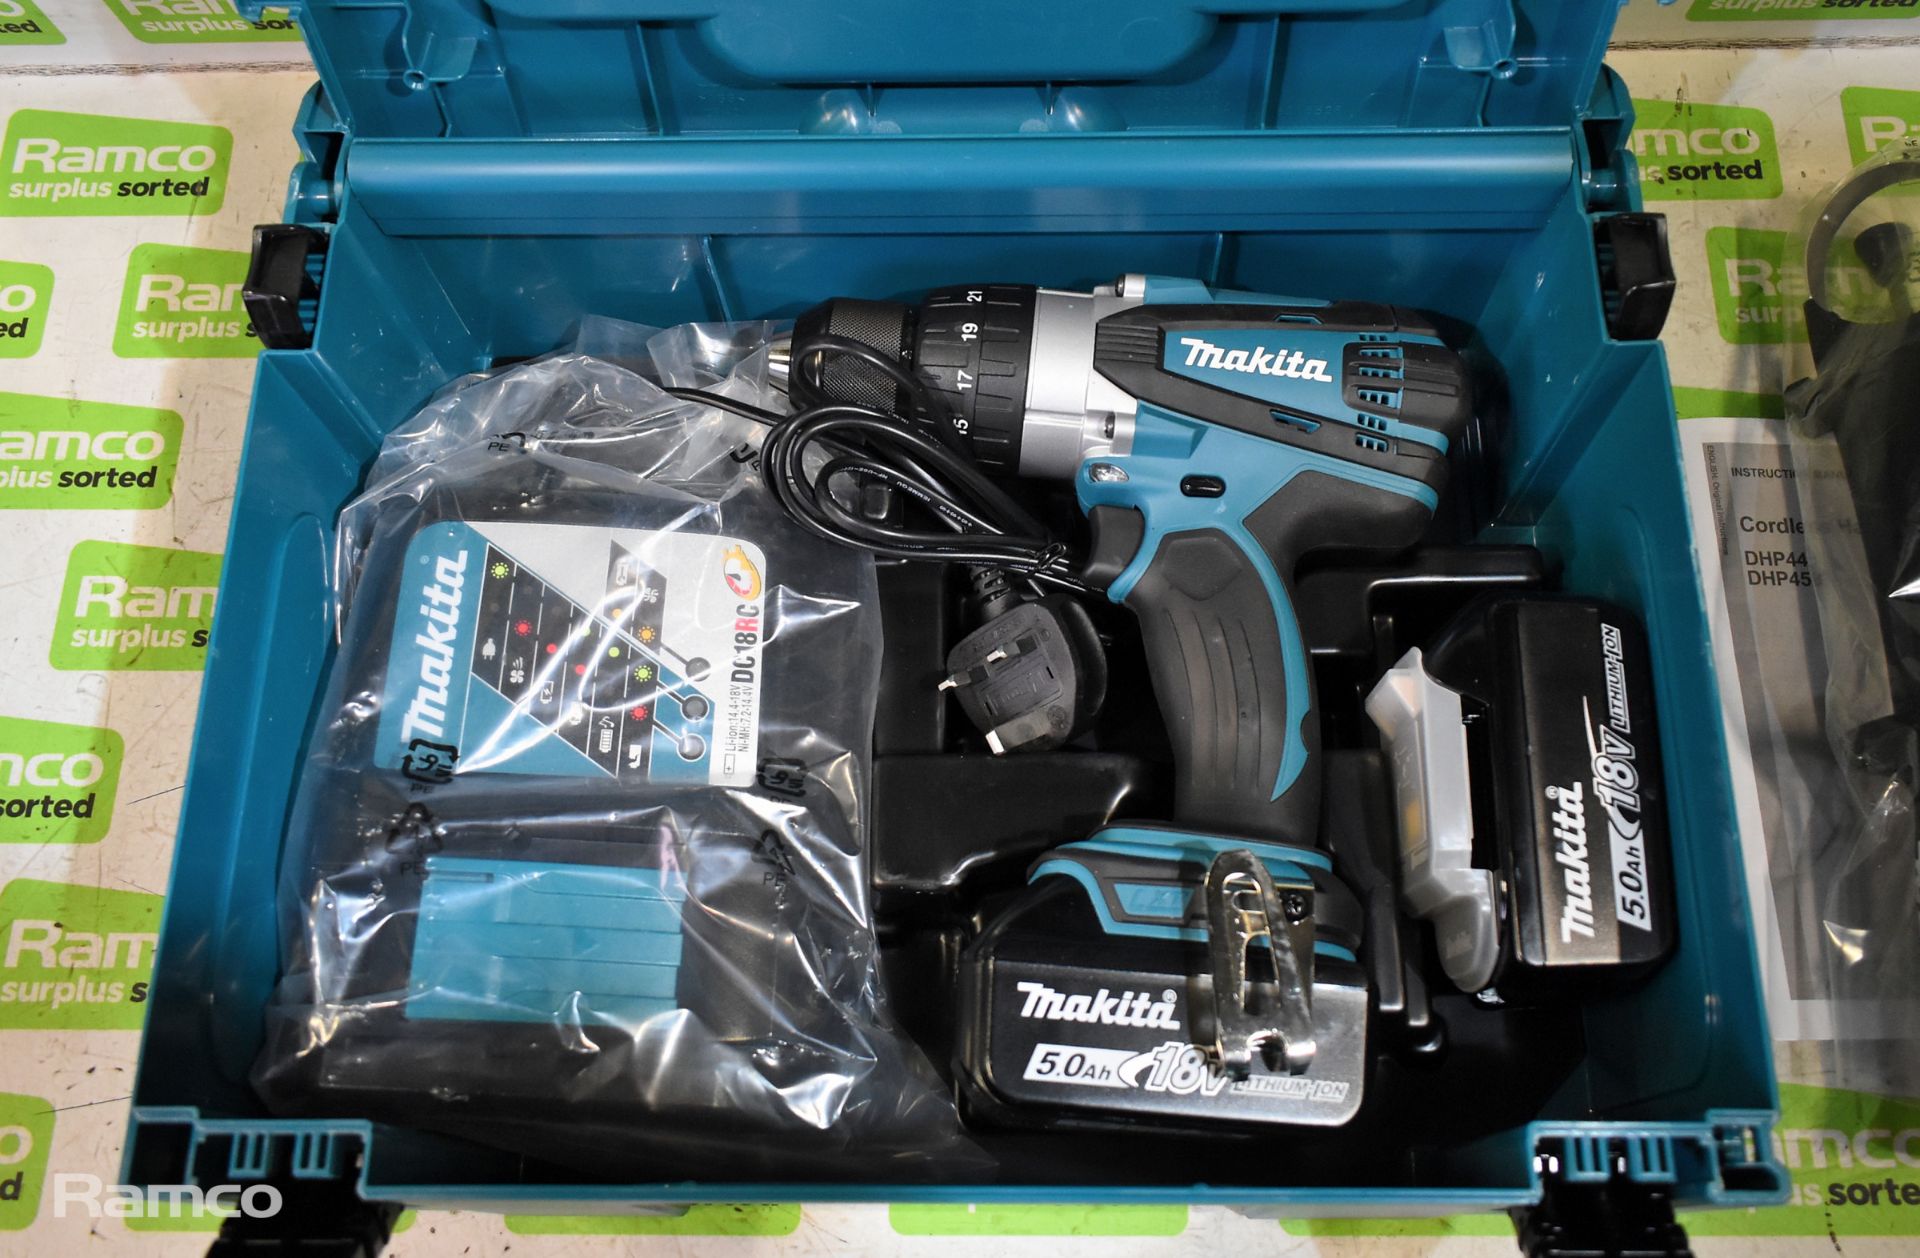 Makita DHP458RTJ 18v combi drill with 2x 5.0Ah batteries and charger - in case - Image 3 of 10